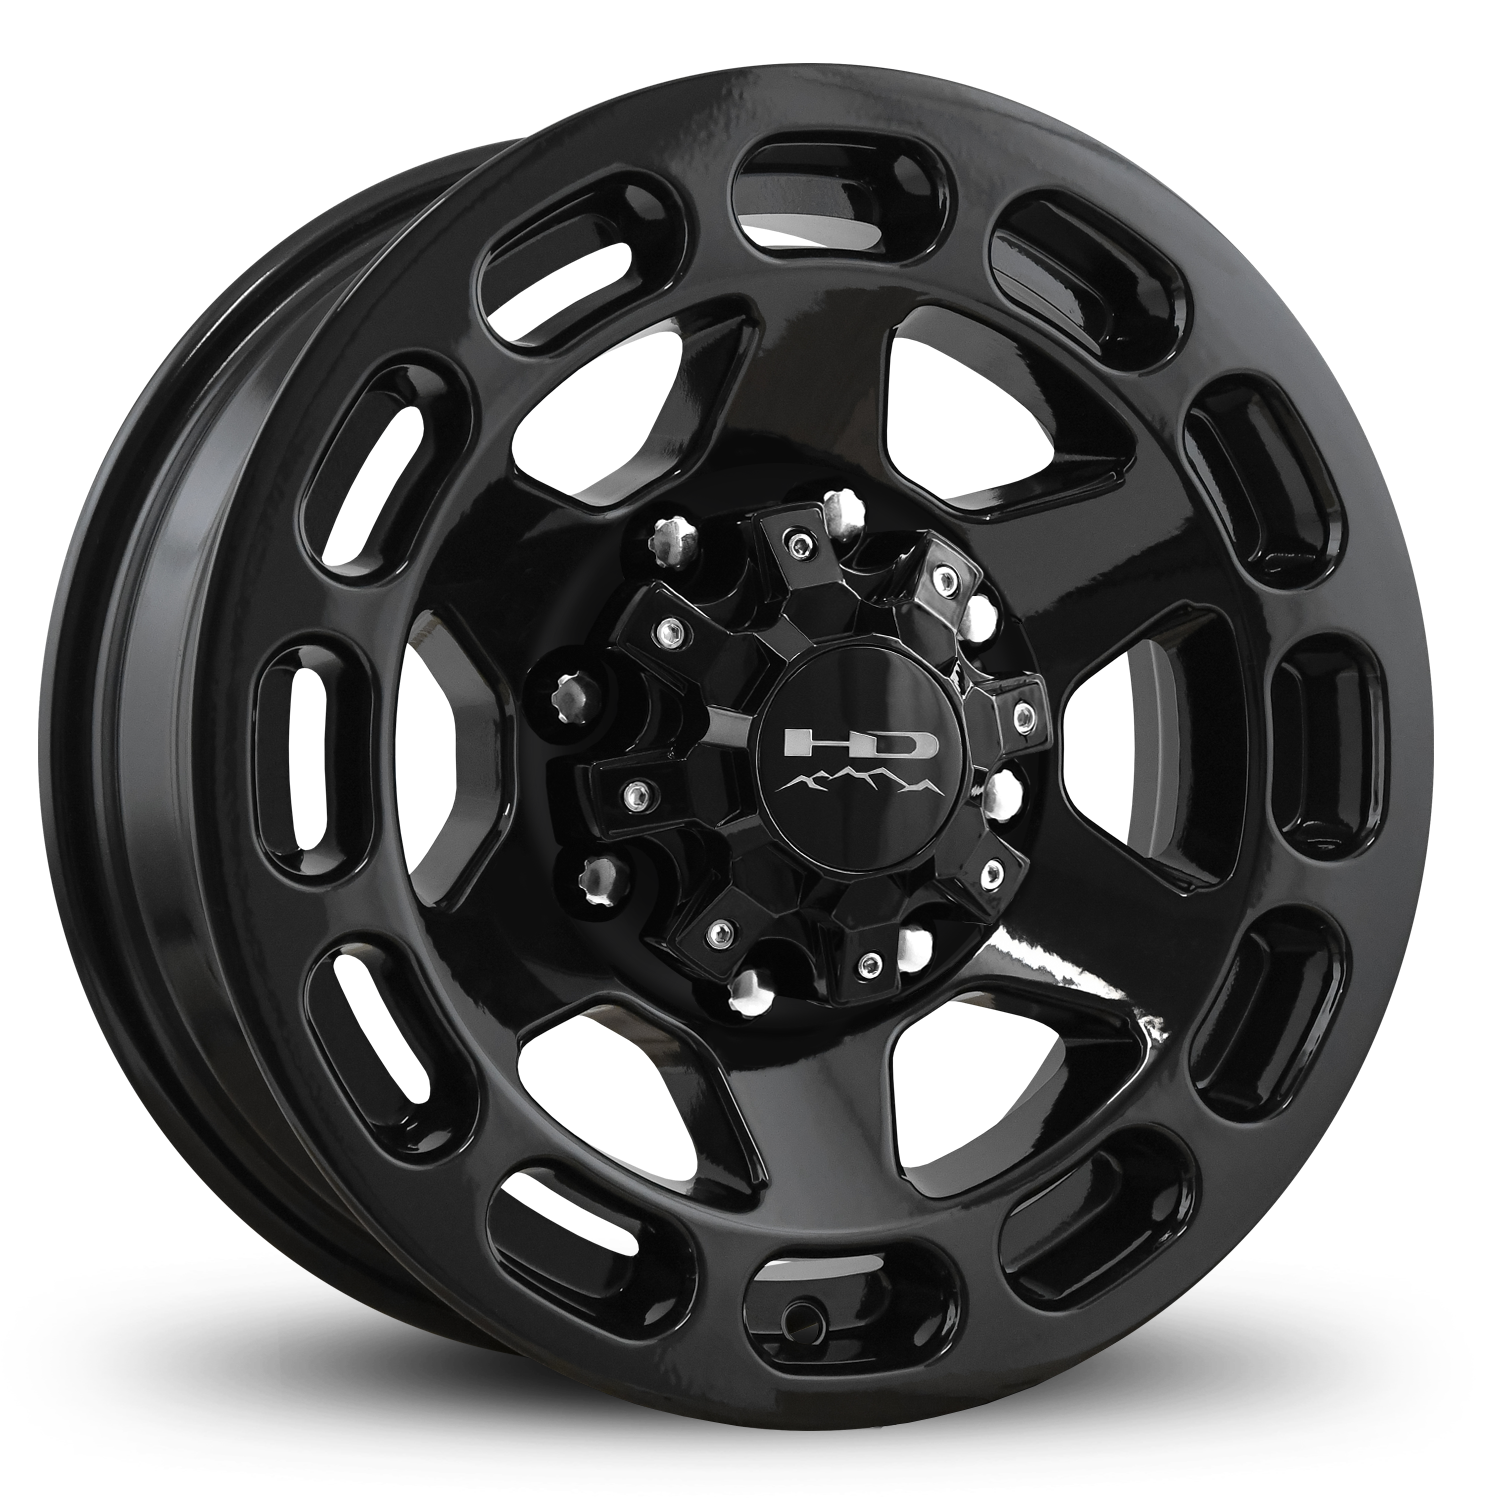 HD Off-Road Patriot Custom Trailer Wheel & Tire packages in 16x6.0 in 8 lug All Gloss Black for Unility, Boat, Car, Construction, Horse, & RV